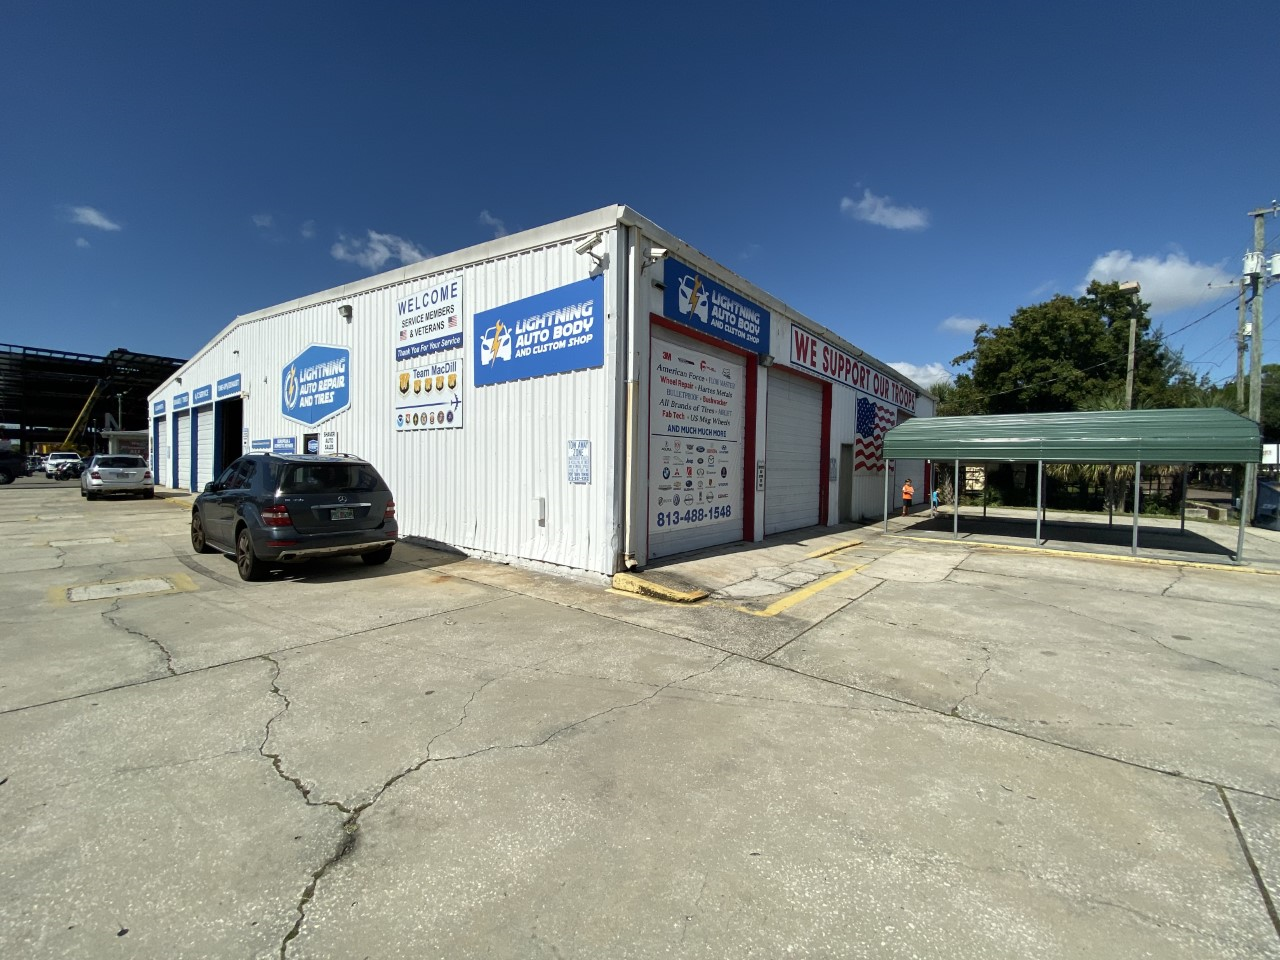 Lightning Auto Repair and Tires